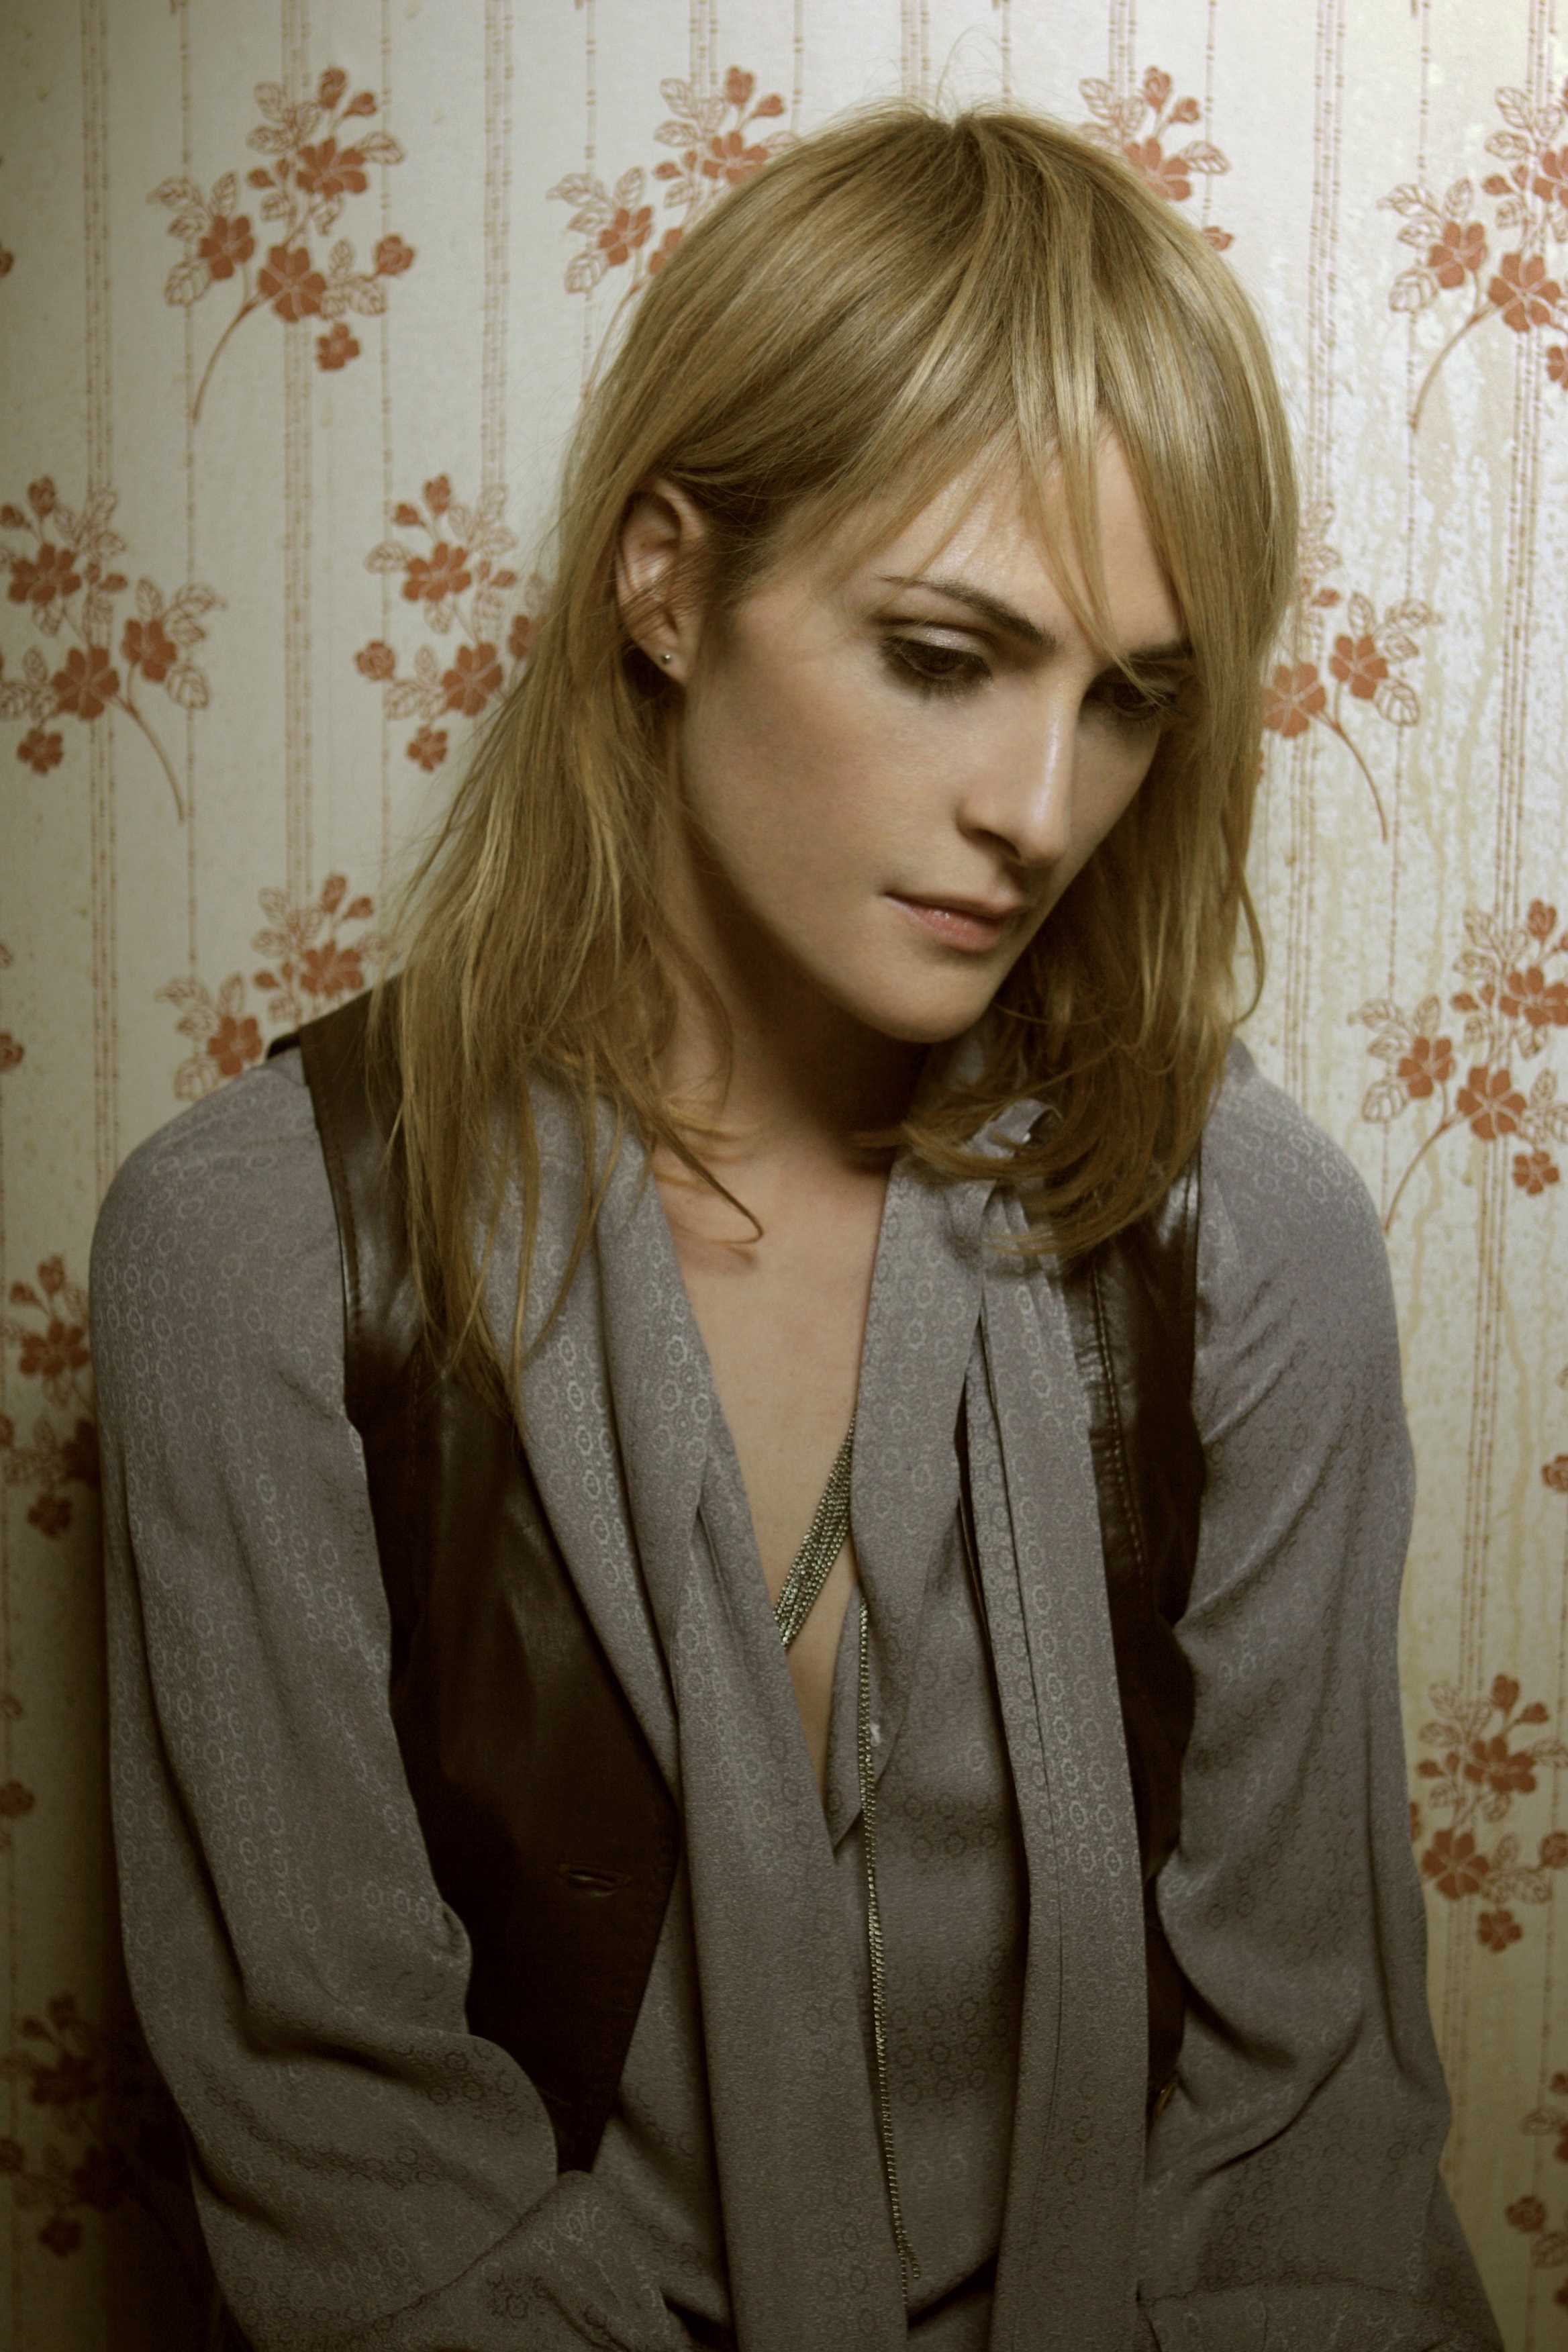 blondes women singers canadian metric band emily haines 2336x3504 wallpaper High Quality Wallpaper, High Definition Wallpaper